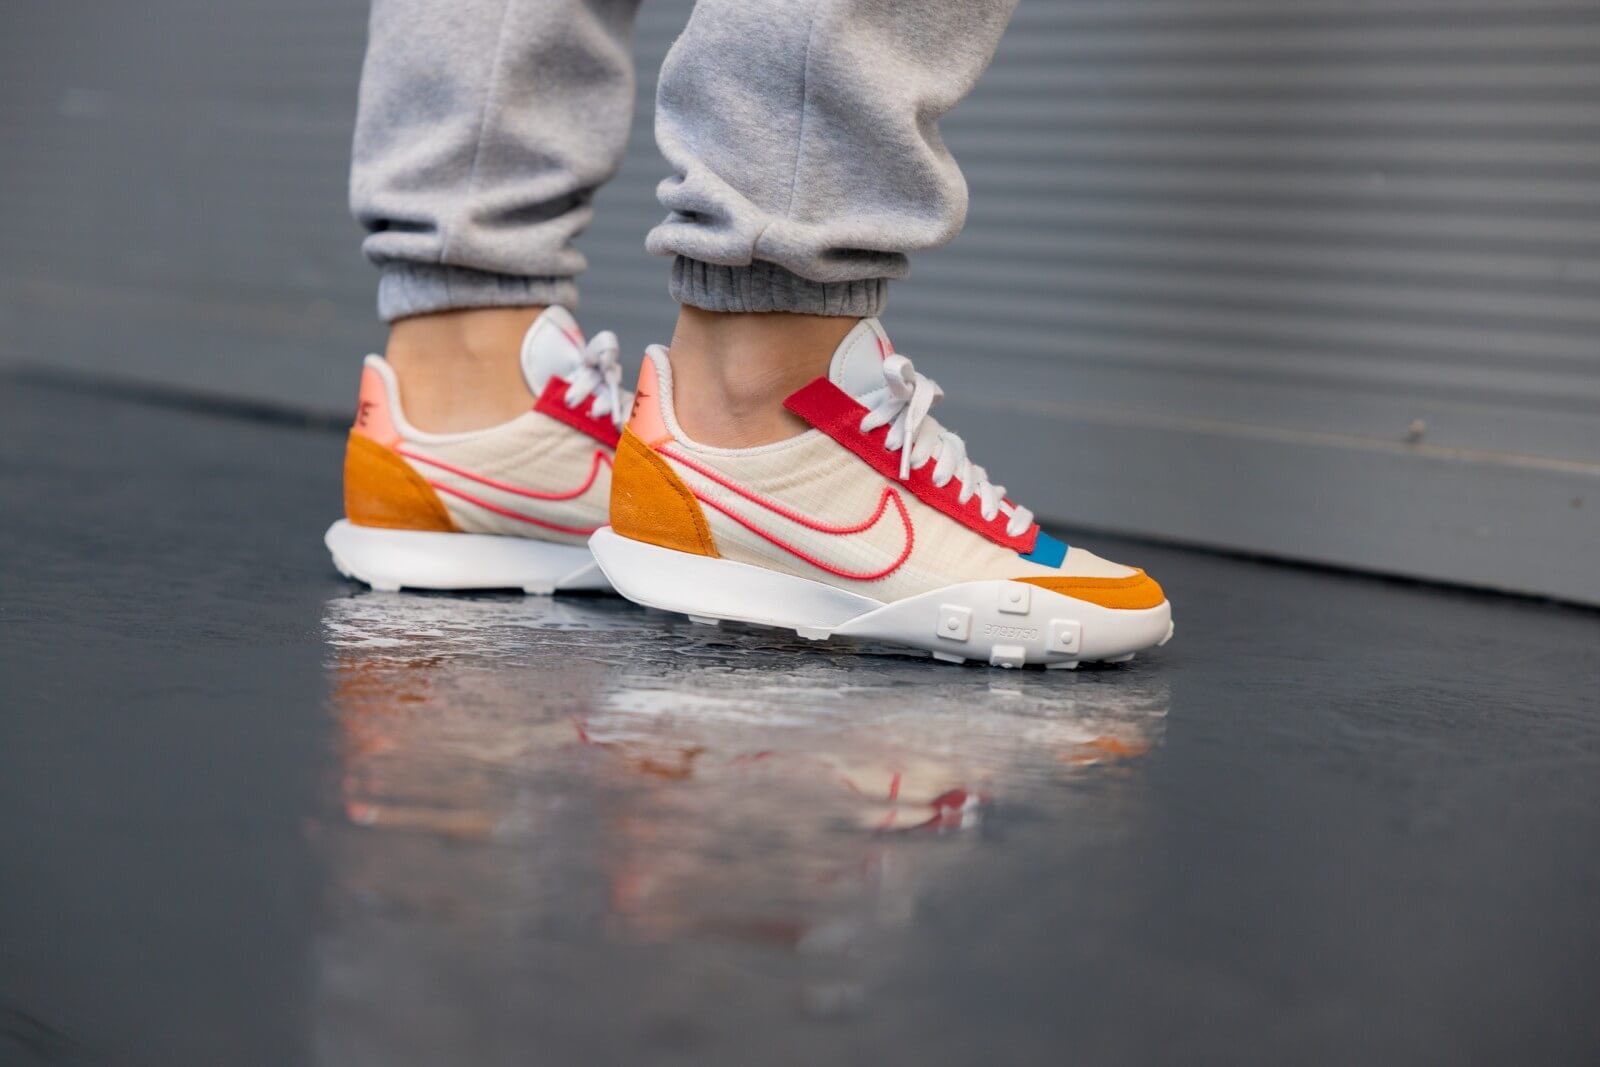 Shesha Lifestyle on Twitter: "Nike Waffle Racer 2X DNA WITH A TWIST. Revamping classic Nike running shoes, the Waffle Racer modernizes the traditional moccasin-inspired upper and Waffle out sole